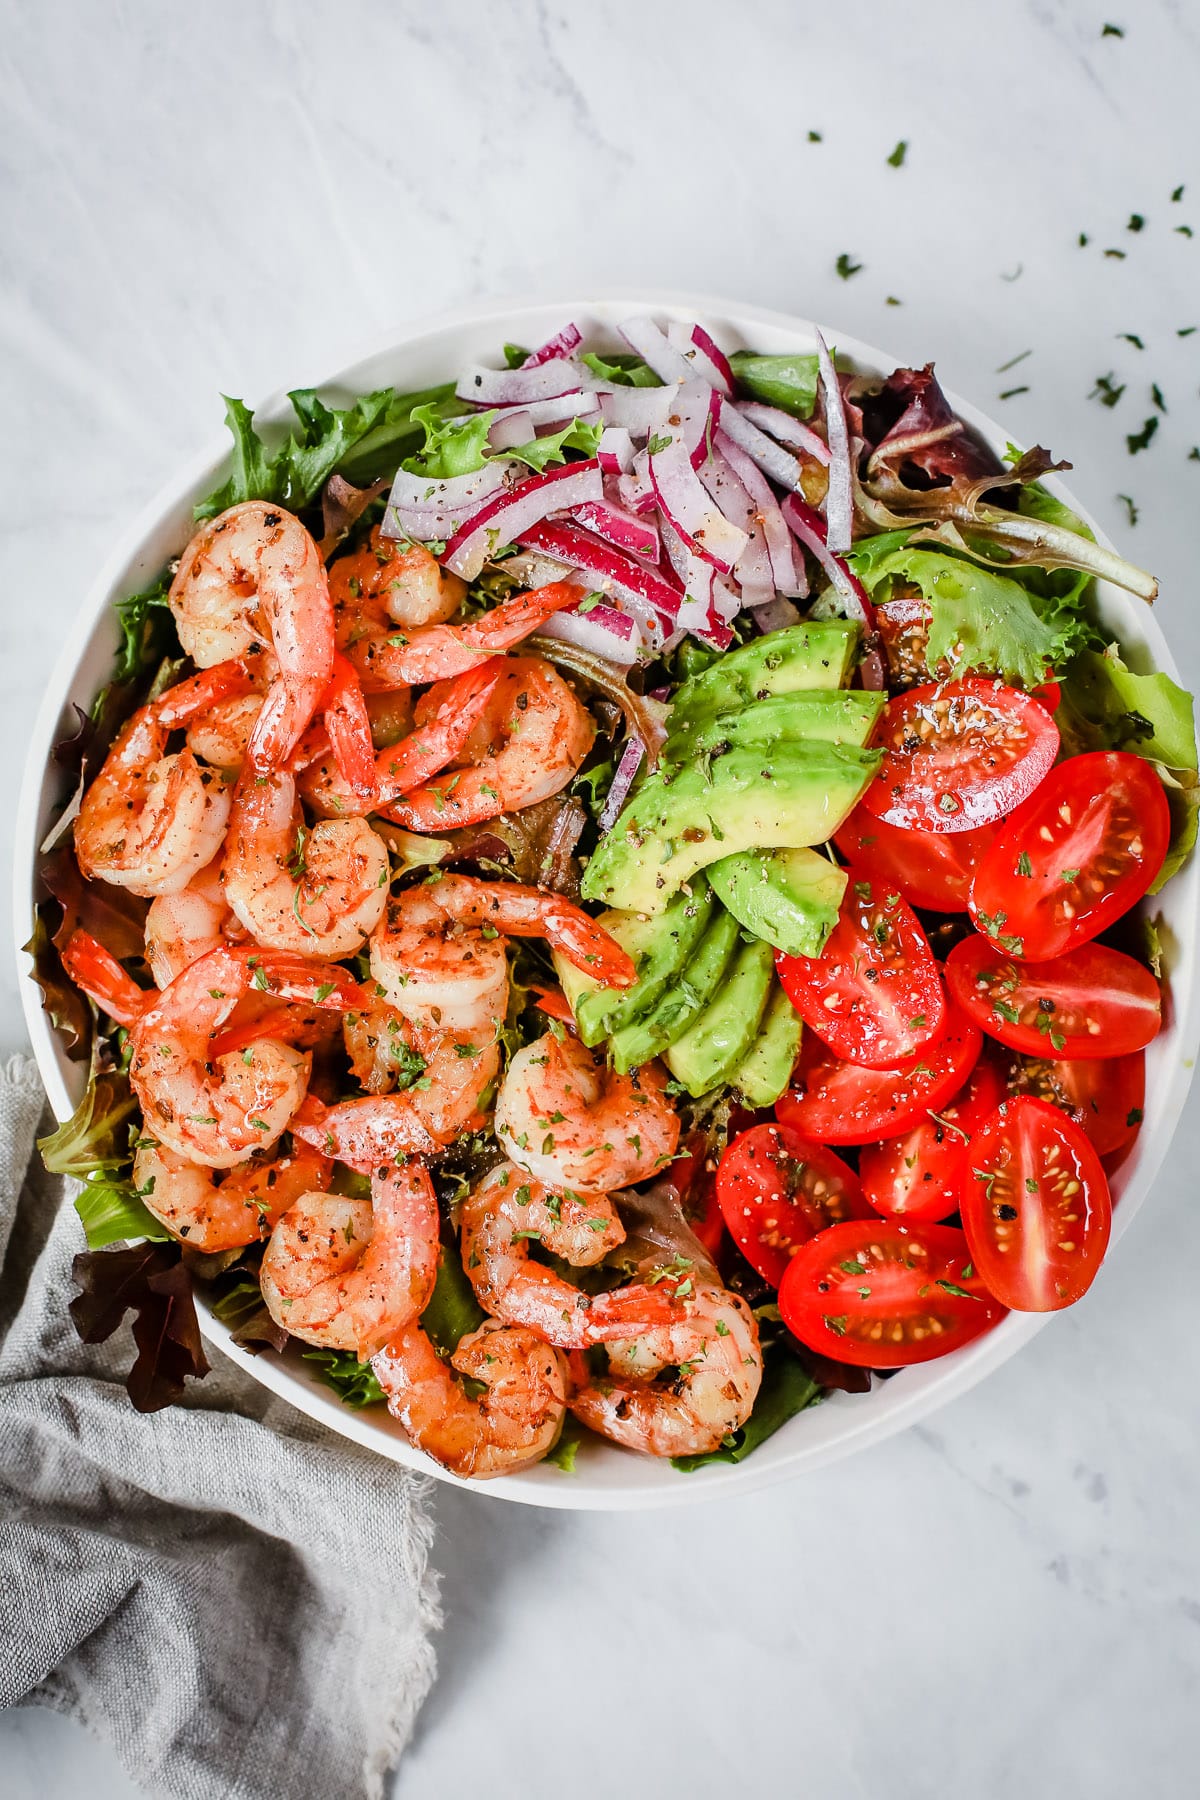 A bowl with shrimp, tomatoes, avocados, onions, and greens.